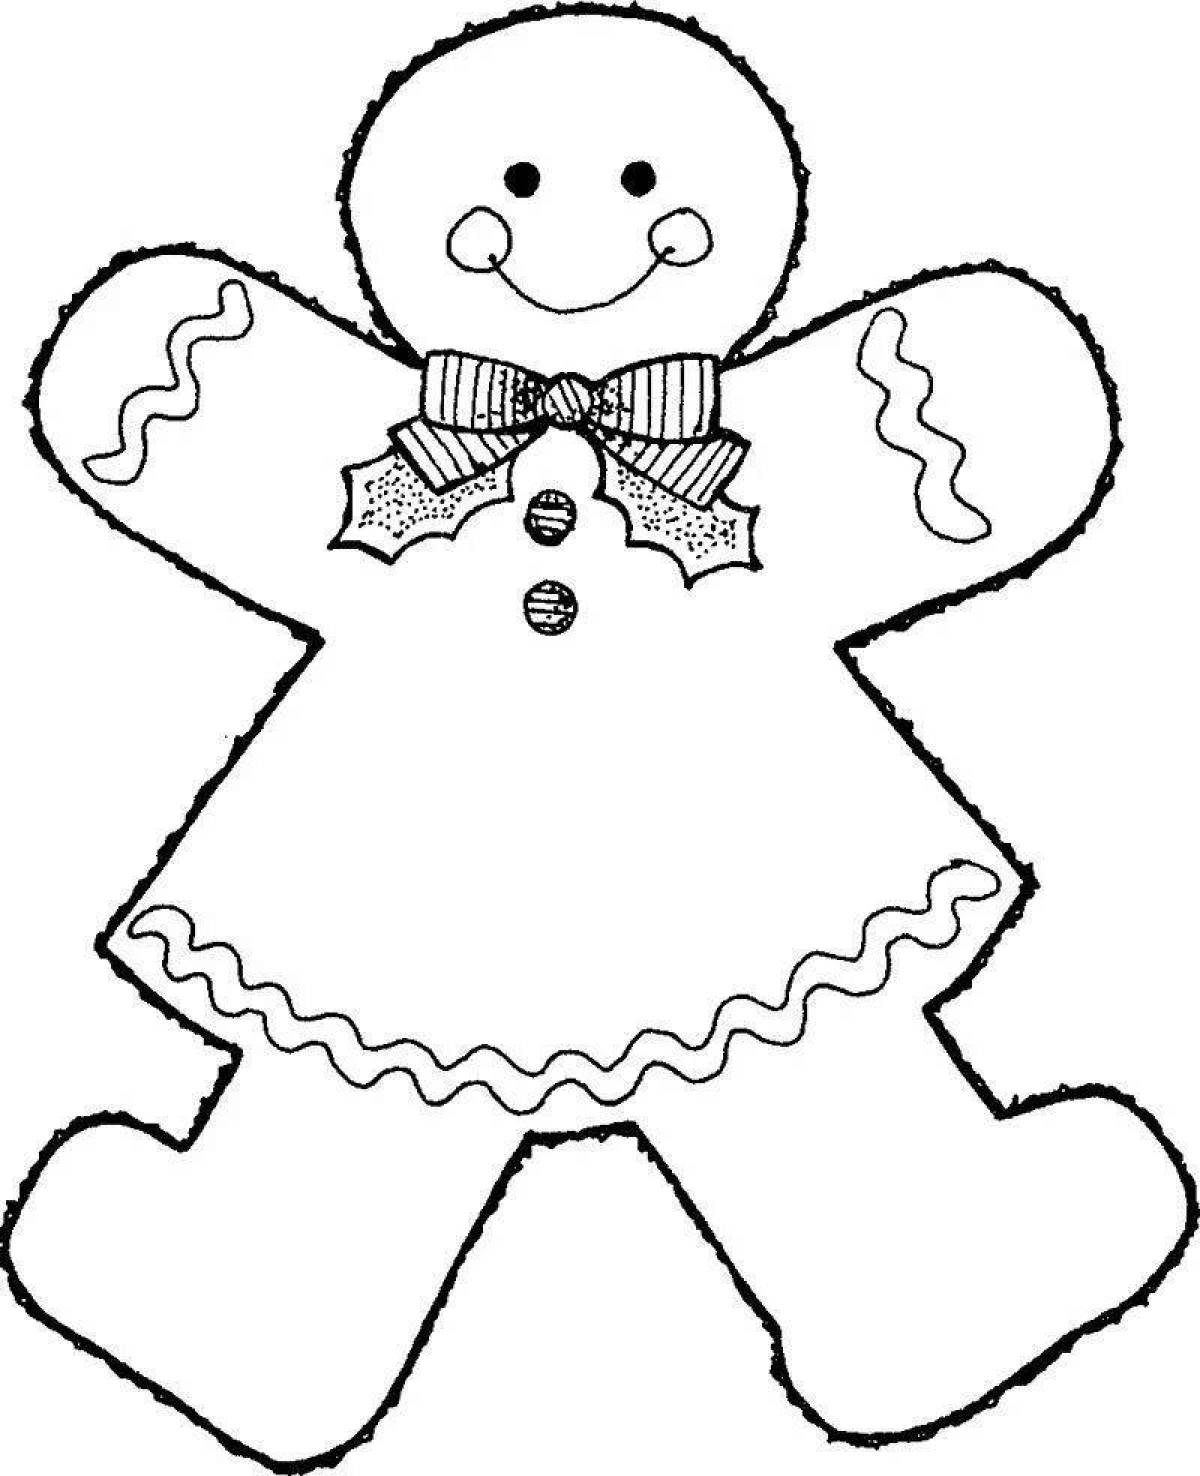 Adorable gingerbread coloring page